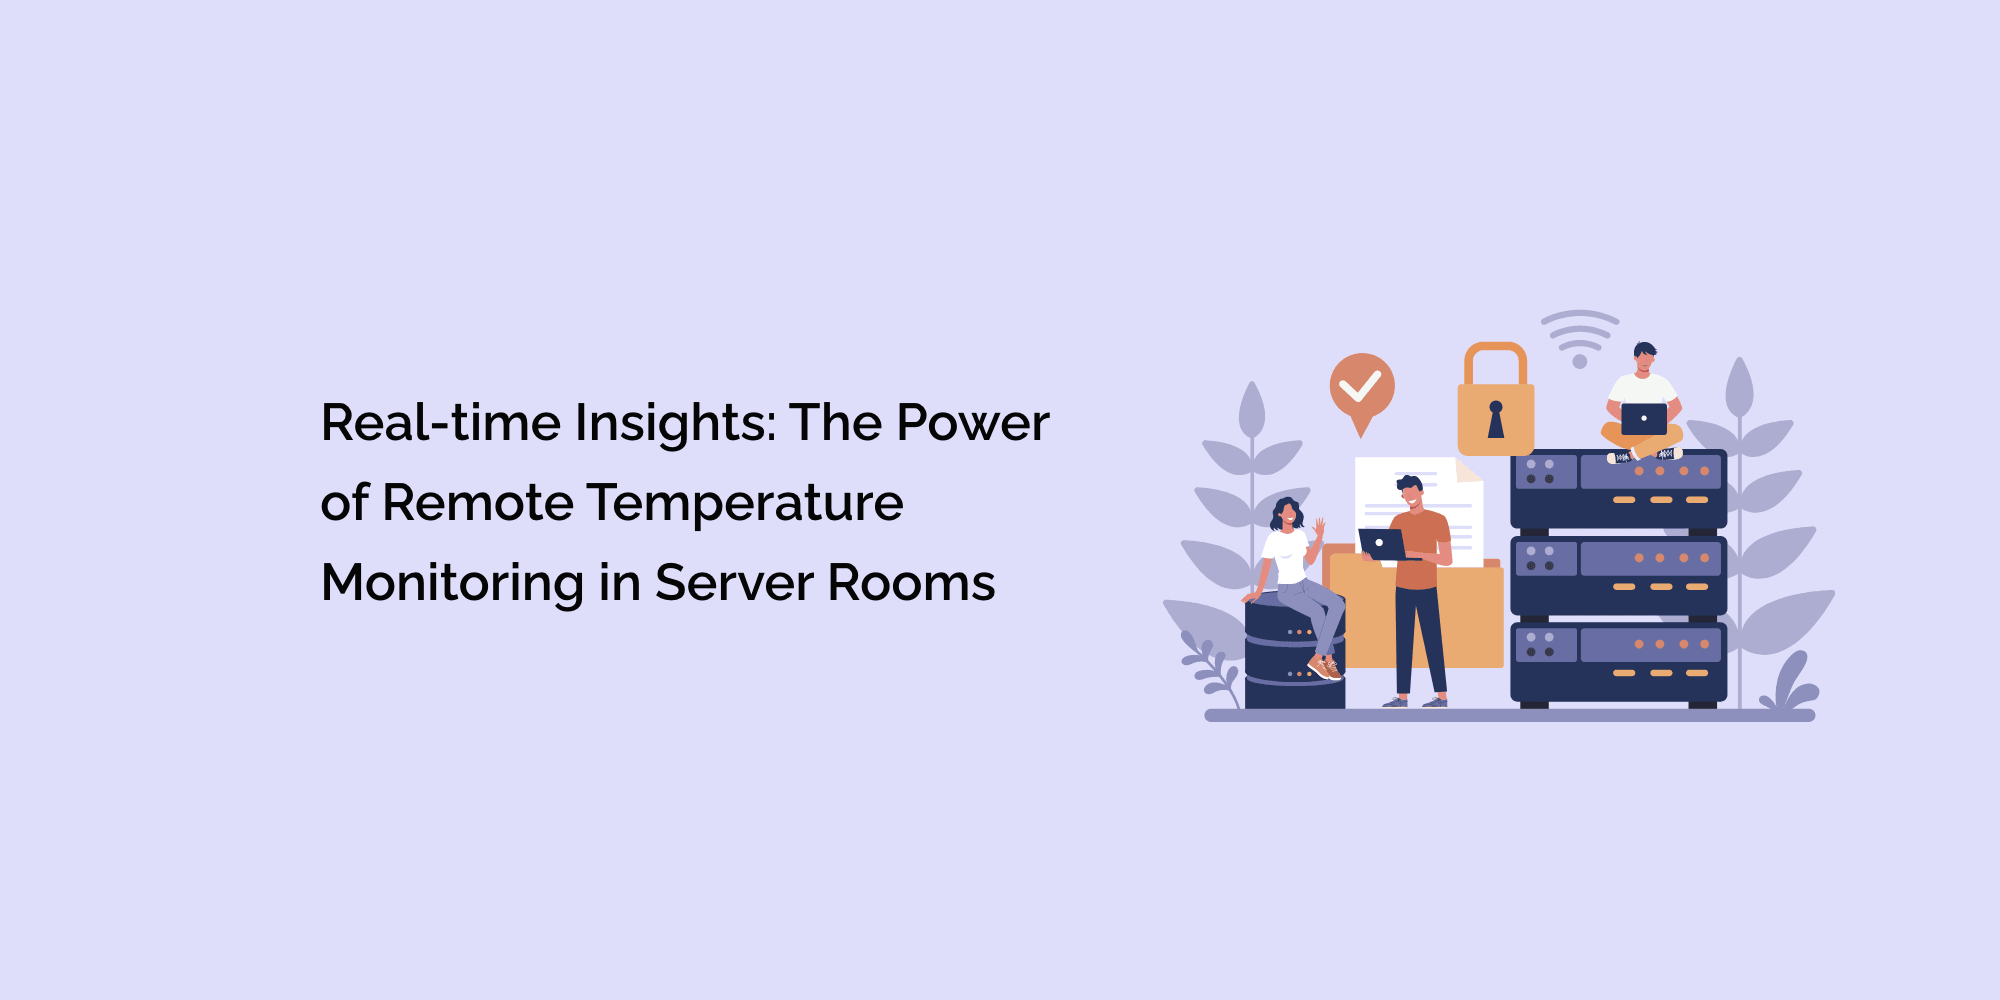 Real-time Insights: The Power of Remote Temperature Monitoring in Server Rooms